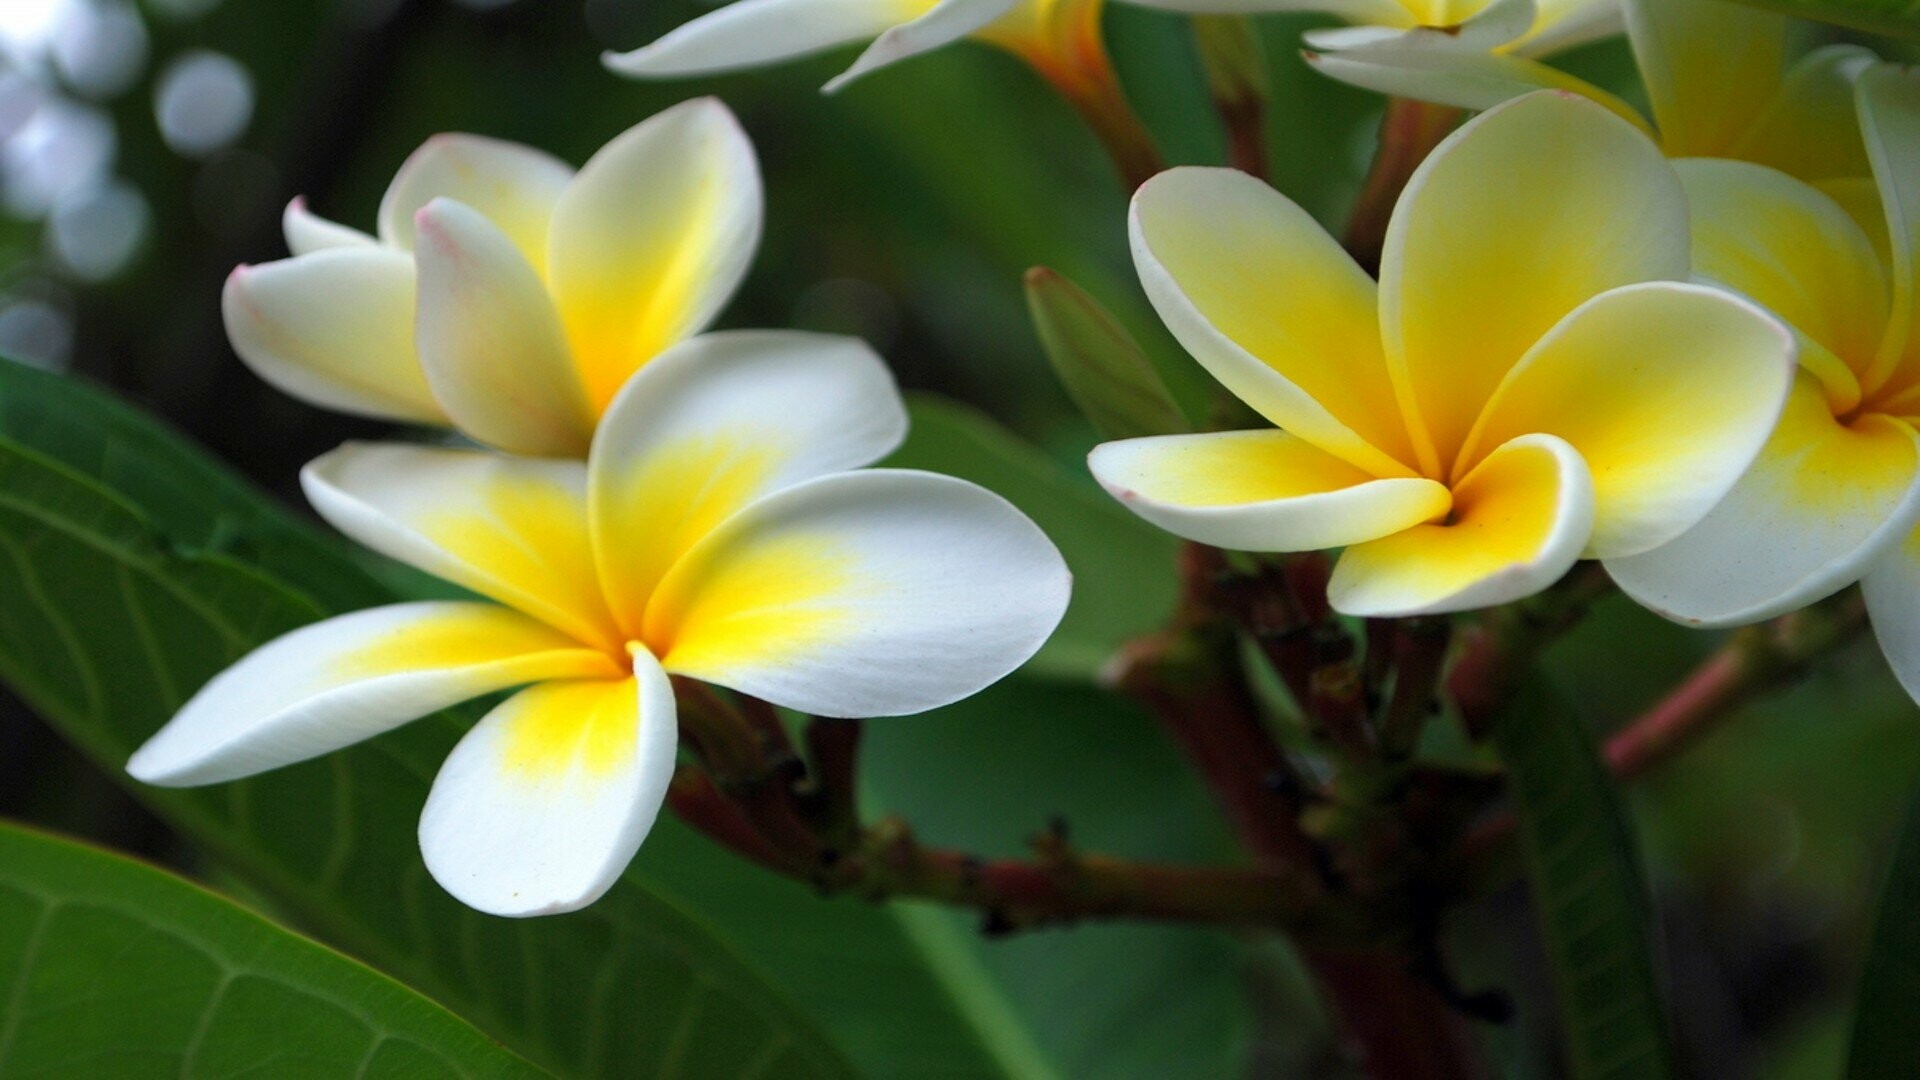 Frangipani Flower: Famous for their appearance in Hawaiian leis, A pleasant floral fragrance. 1920x1080 Full HD Wallpaper.